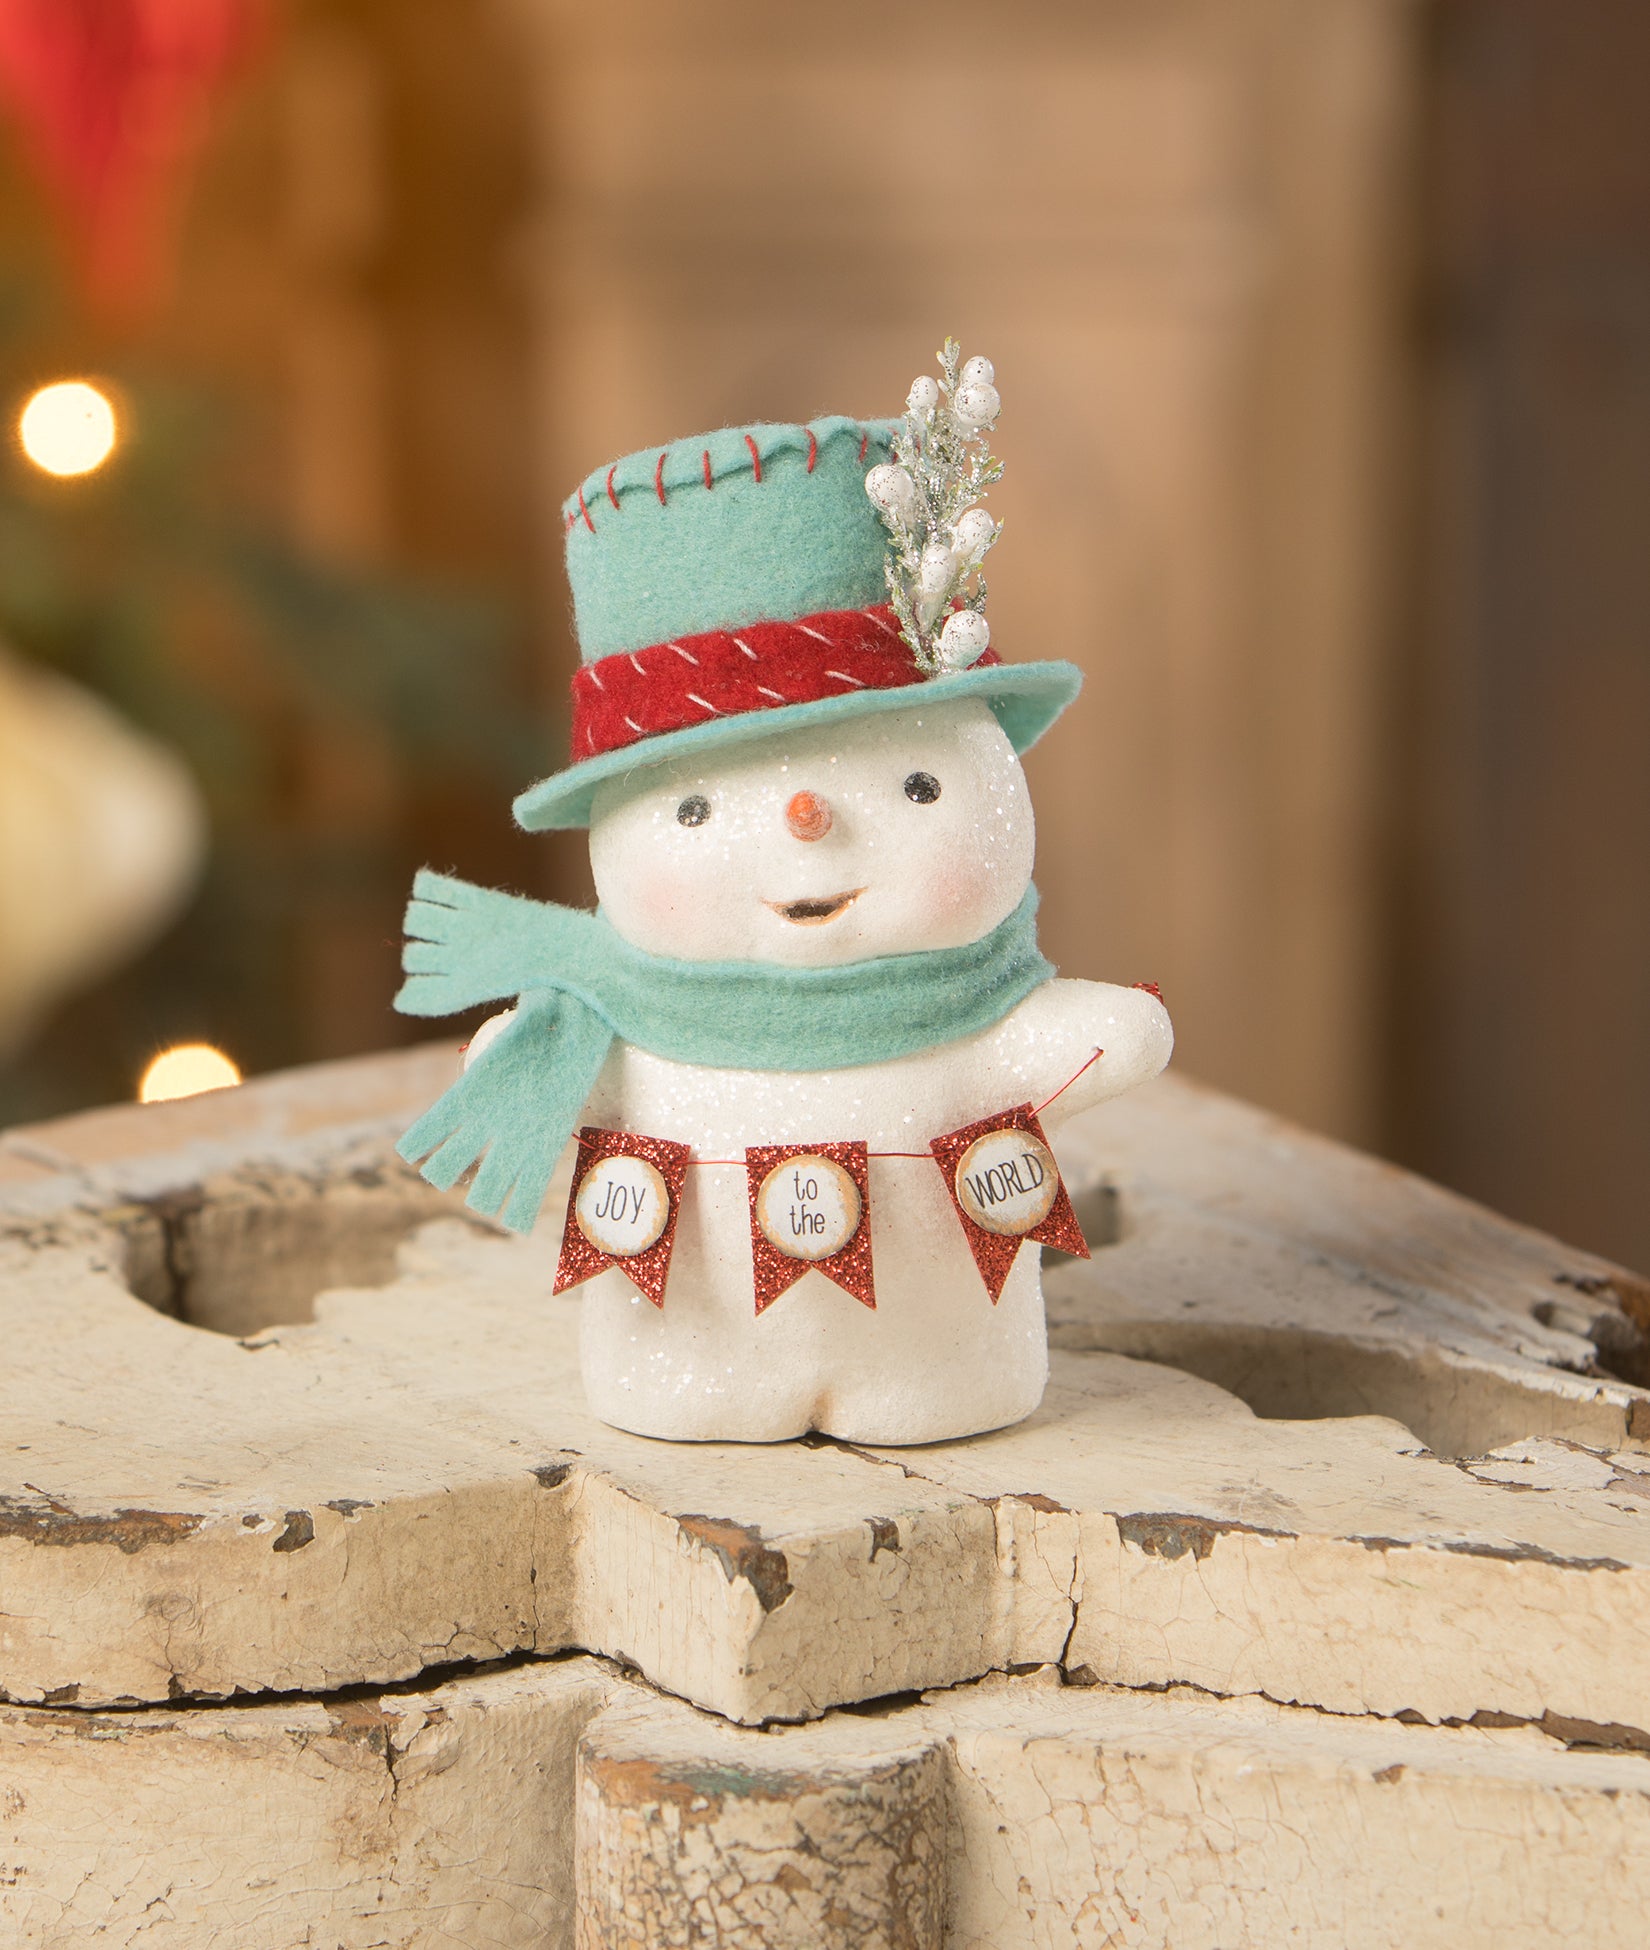 Joy To The World Snowman with Turquoise Top Hat and Joy to The World Banner